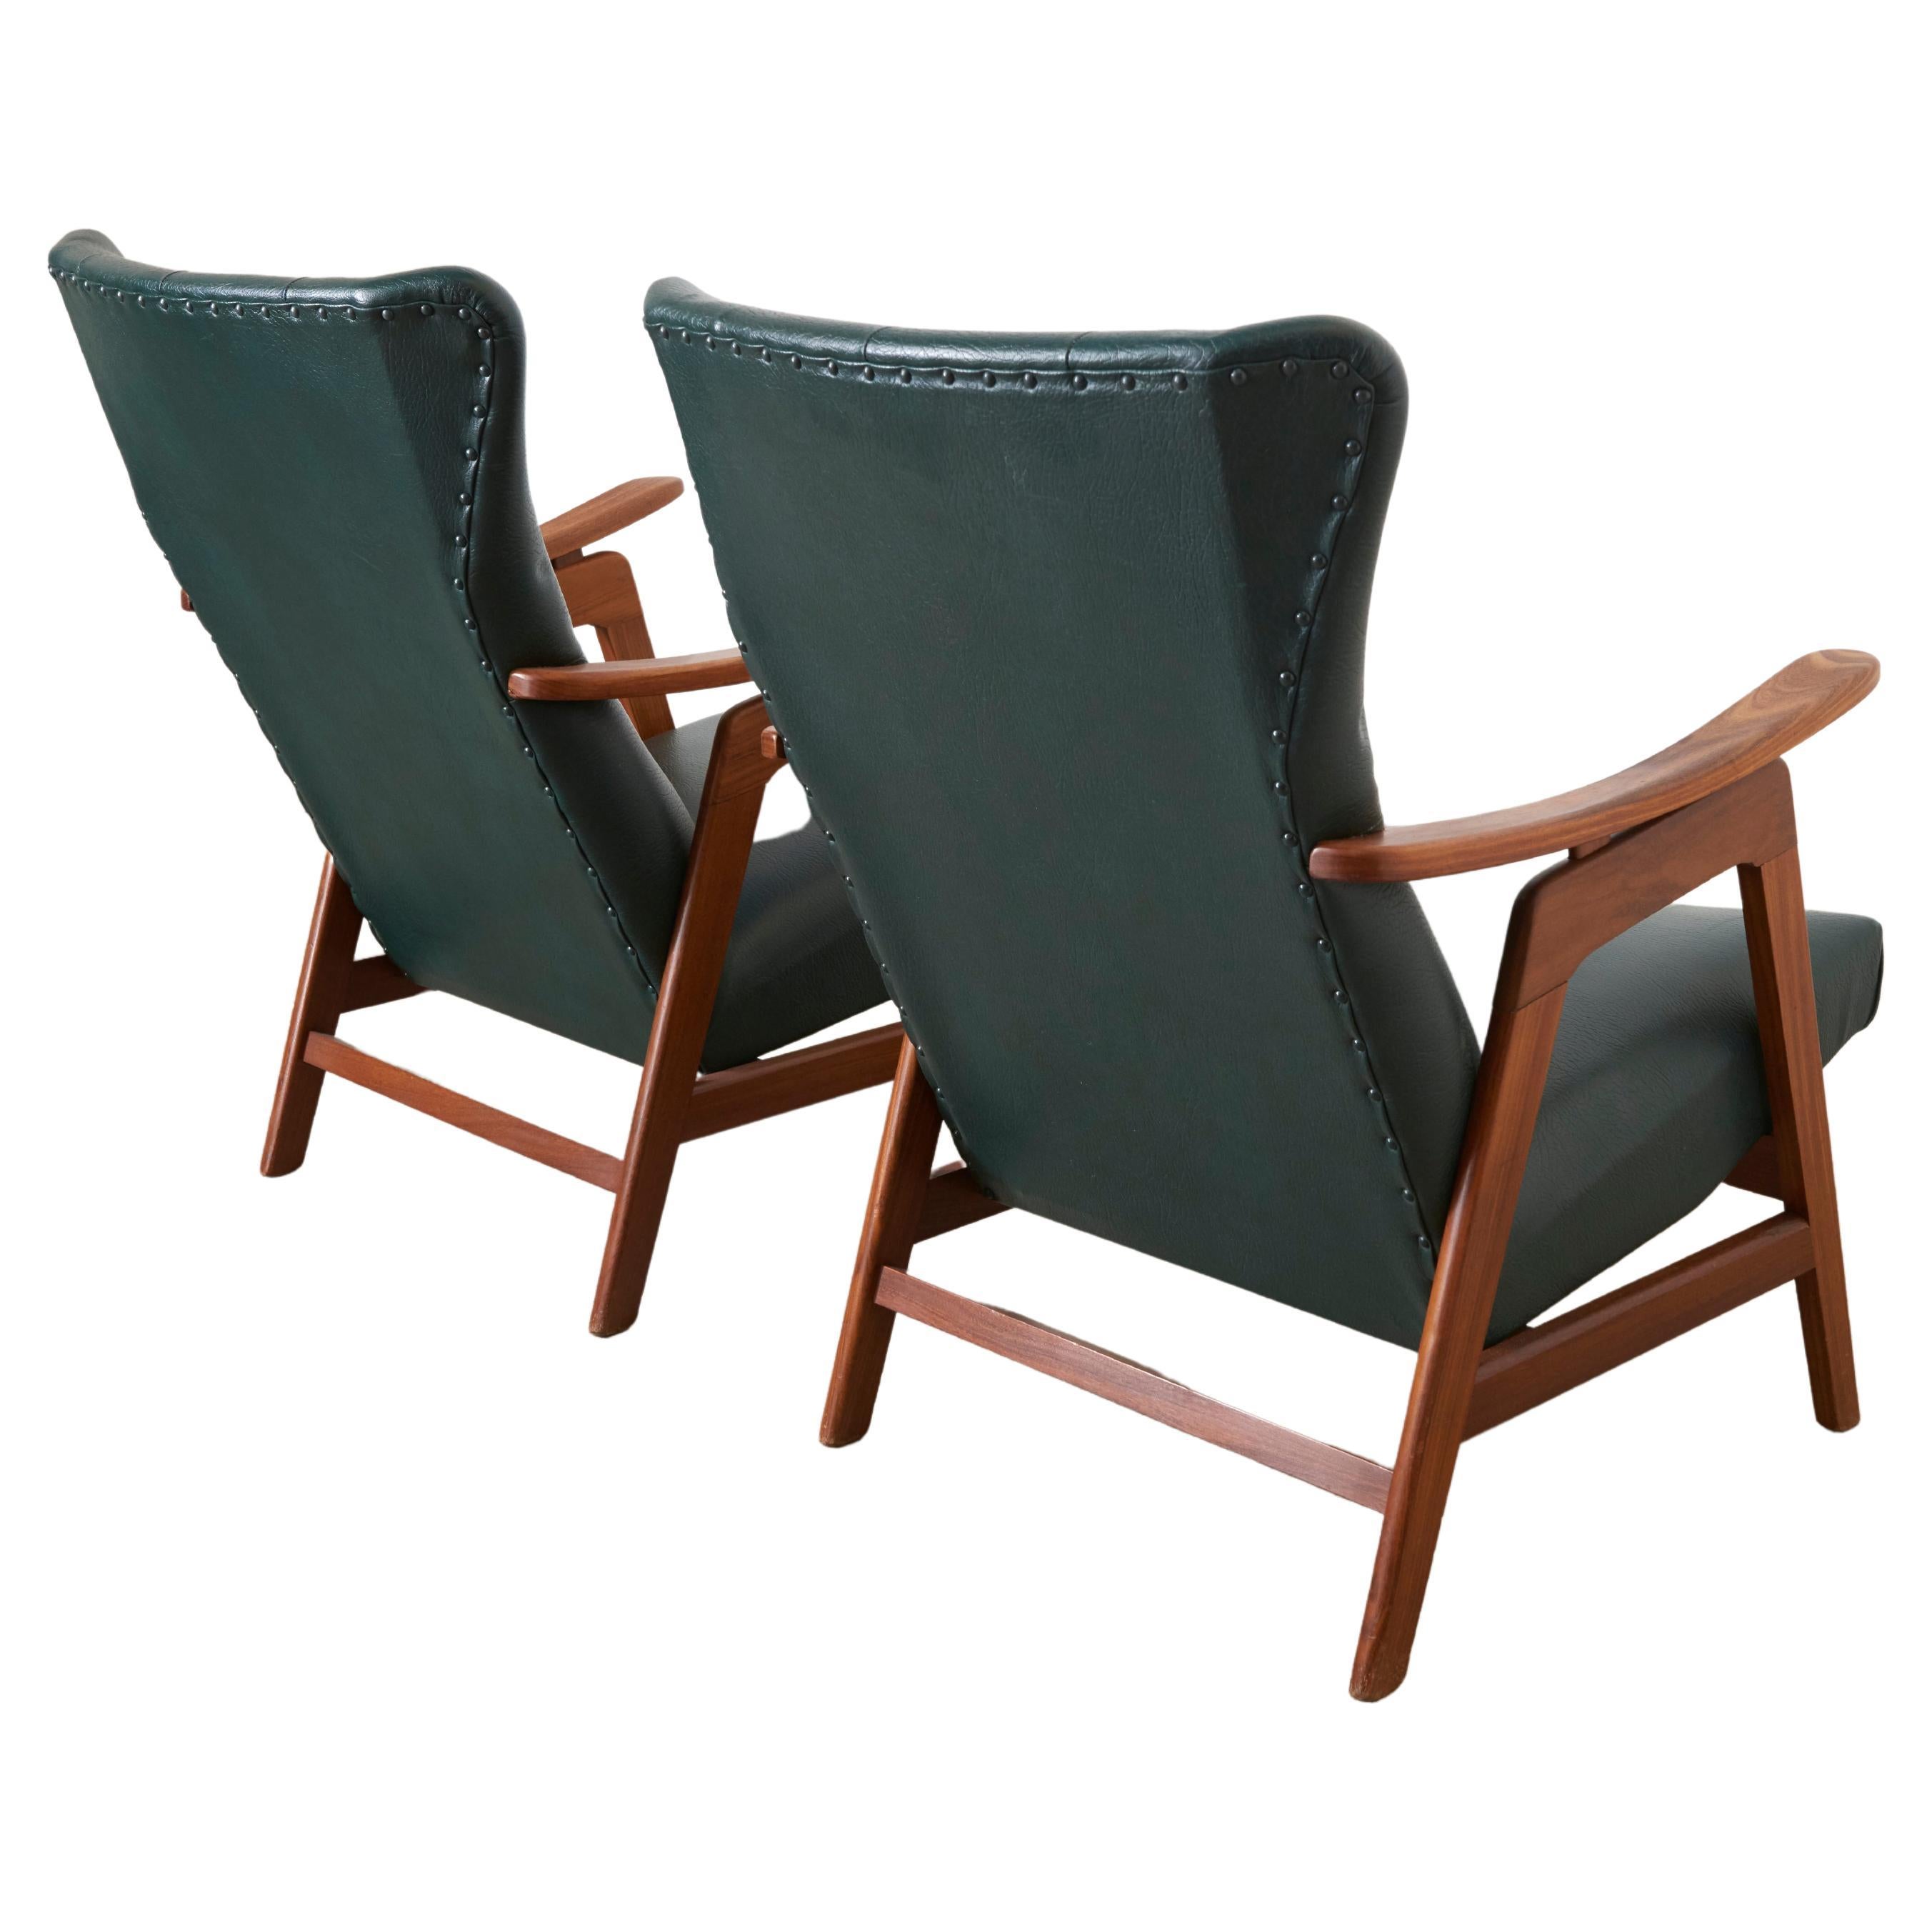 A beautiful set of two lounge chairs designed by Louis Van Teeffelen for Webe,1960s. 

The chairs have a stunning organic shaped solid teak frame and their original green leatherette upholstery. 
Very comfortable chairs and in excellent condition.